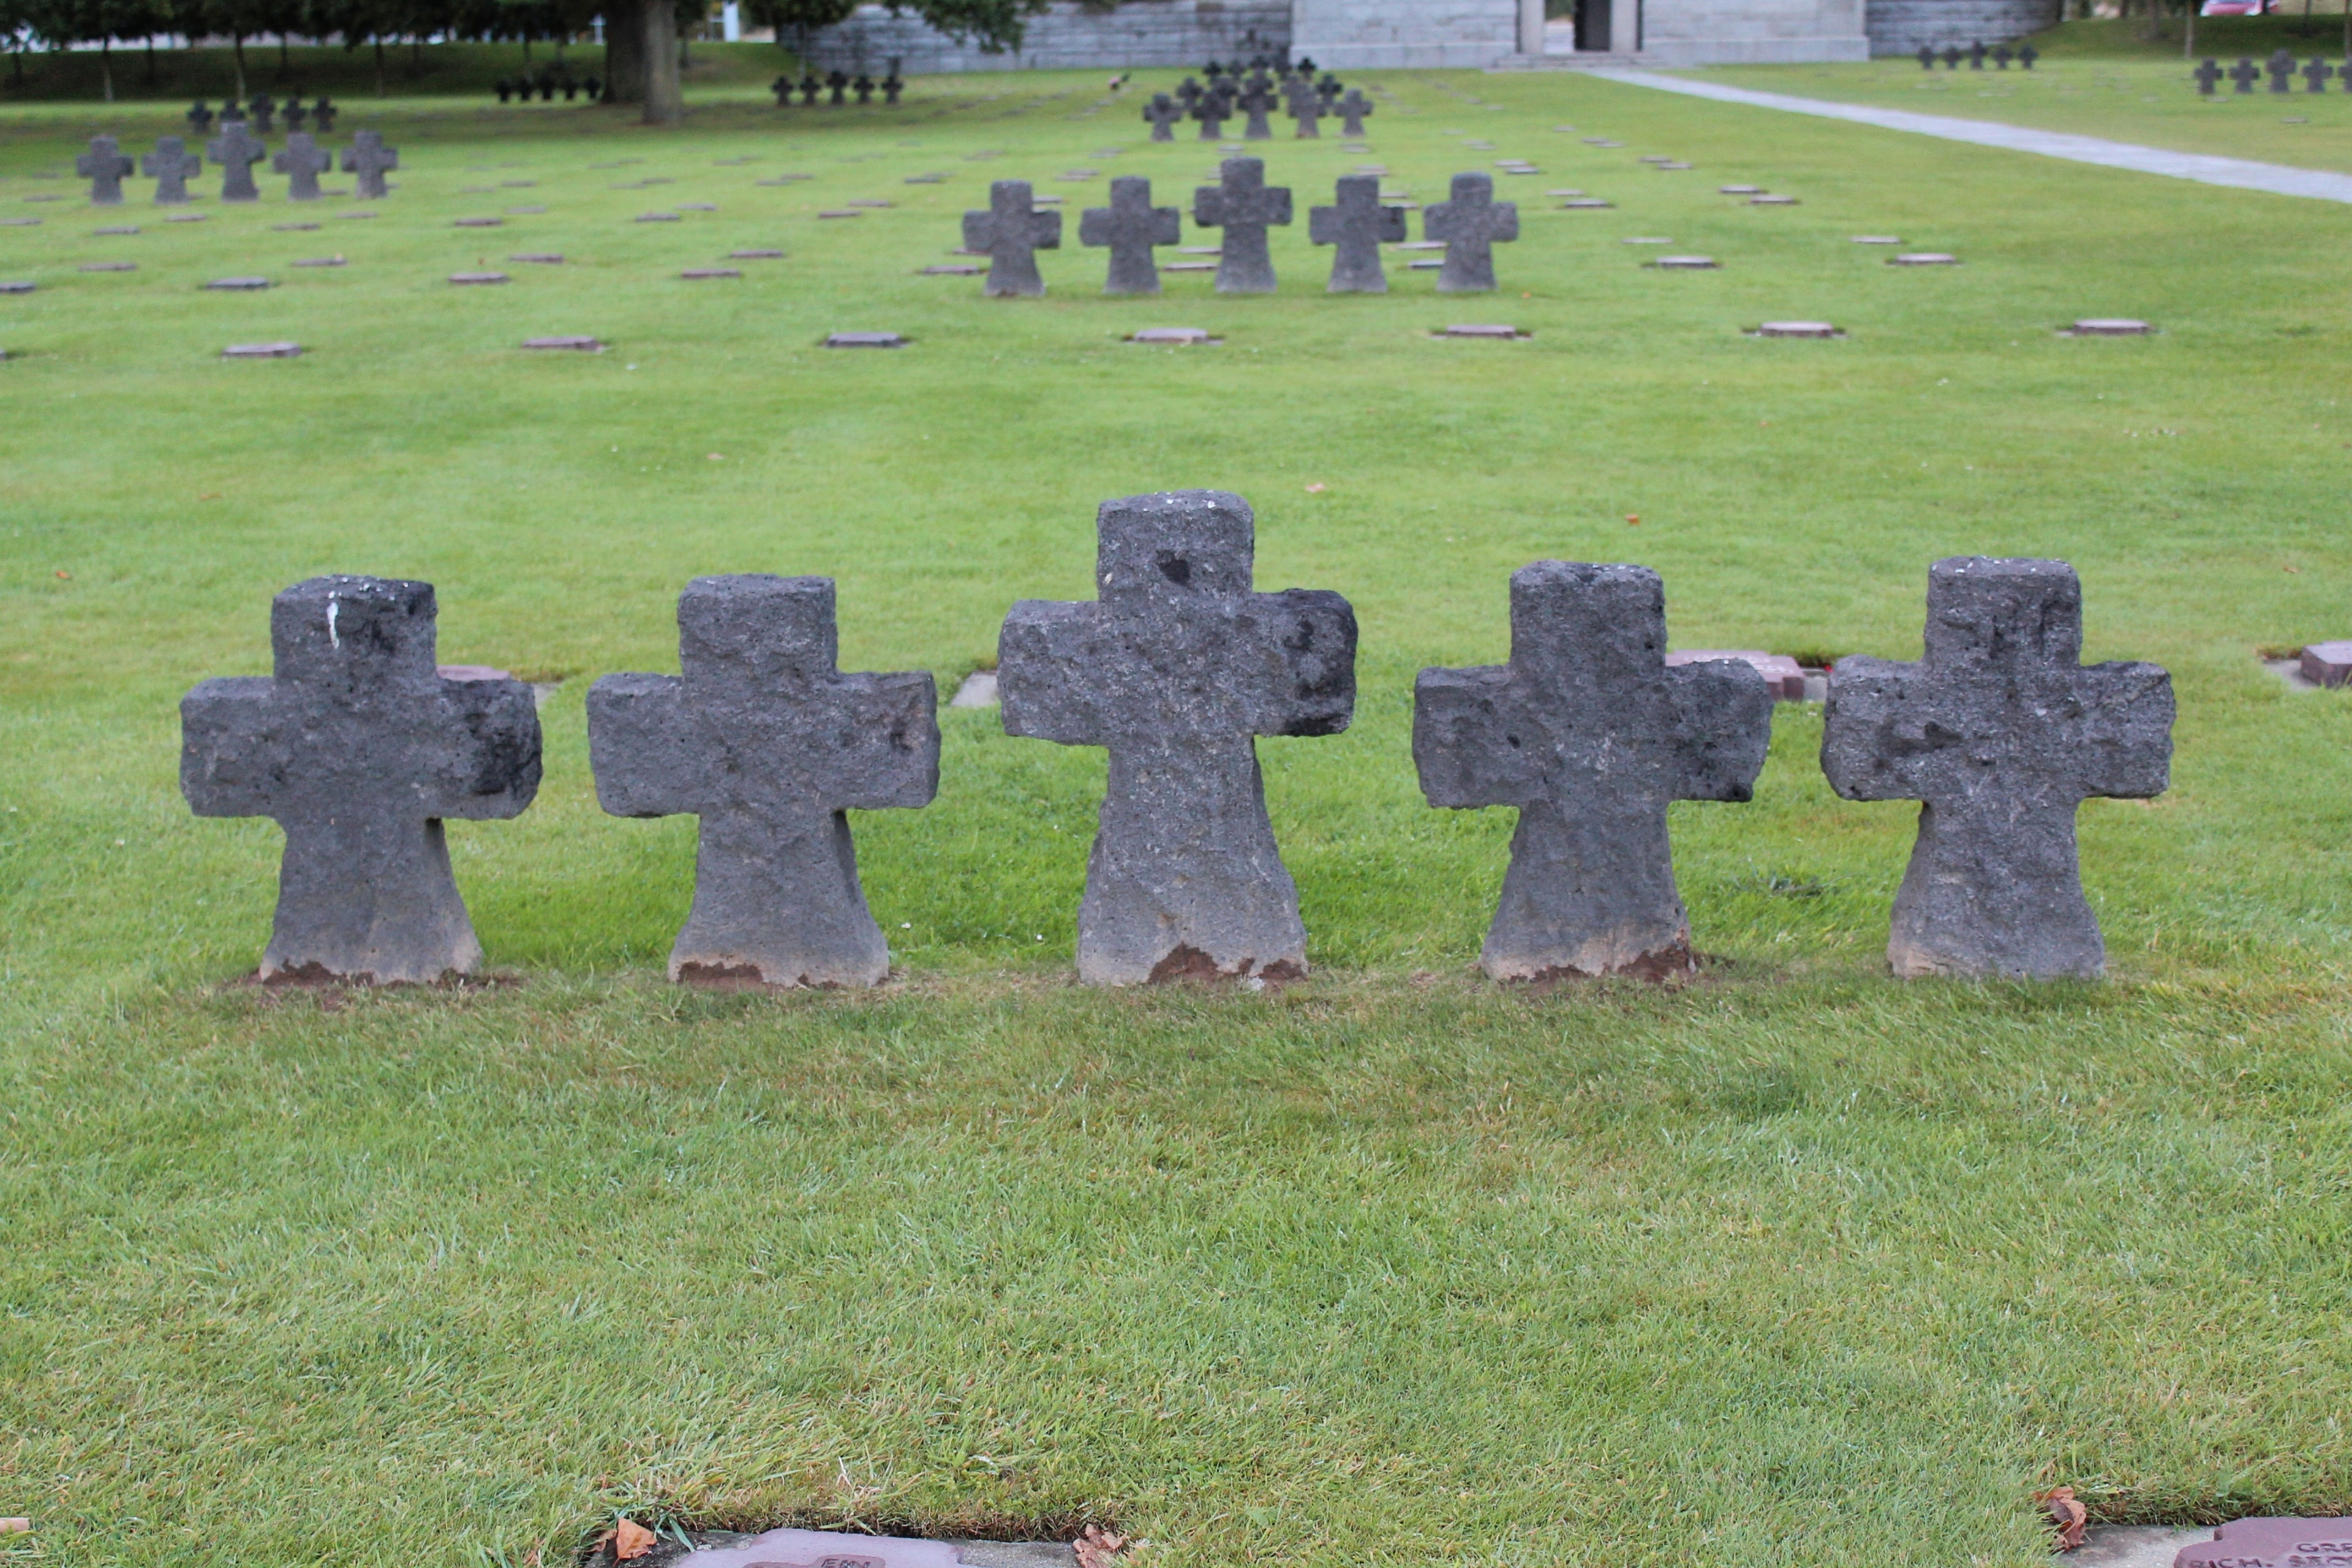 The German cemetery of World War 2. A very primitive, beautifully arranged cemetery. 